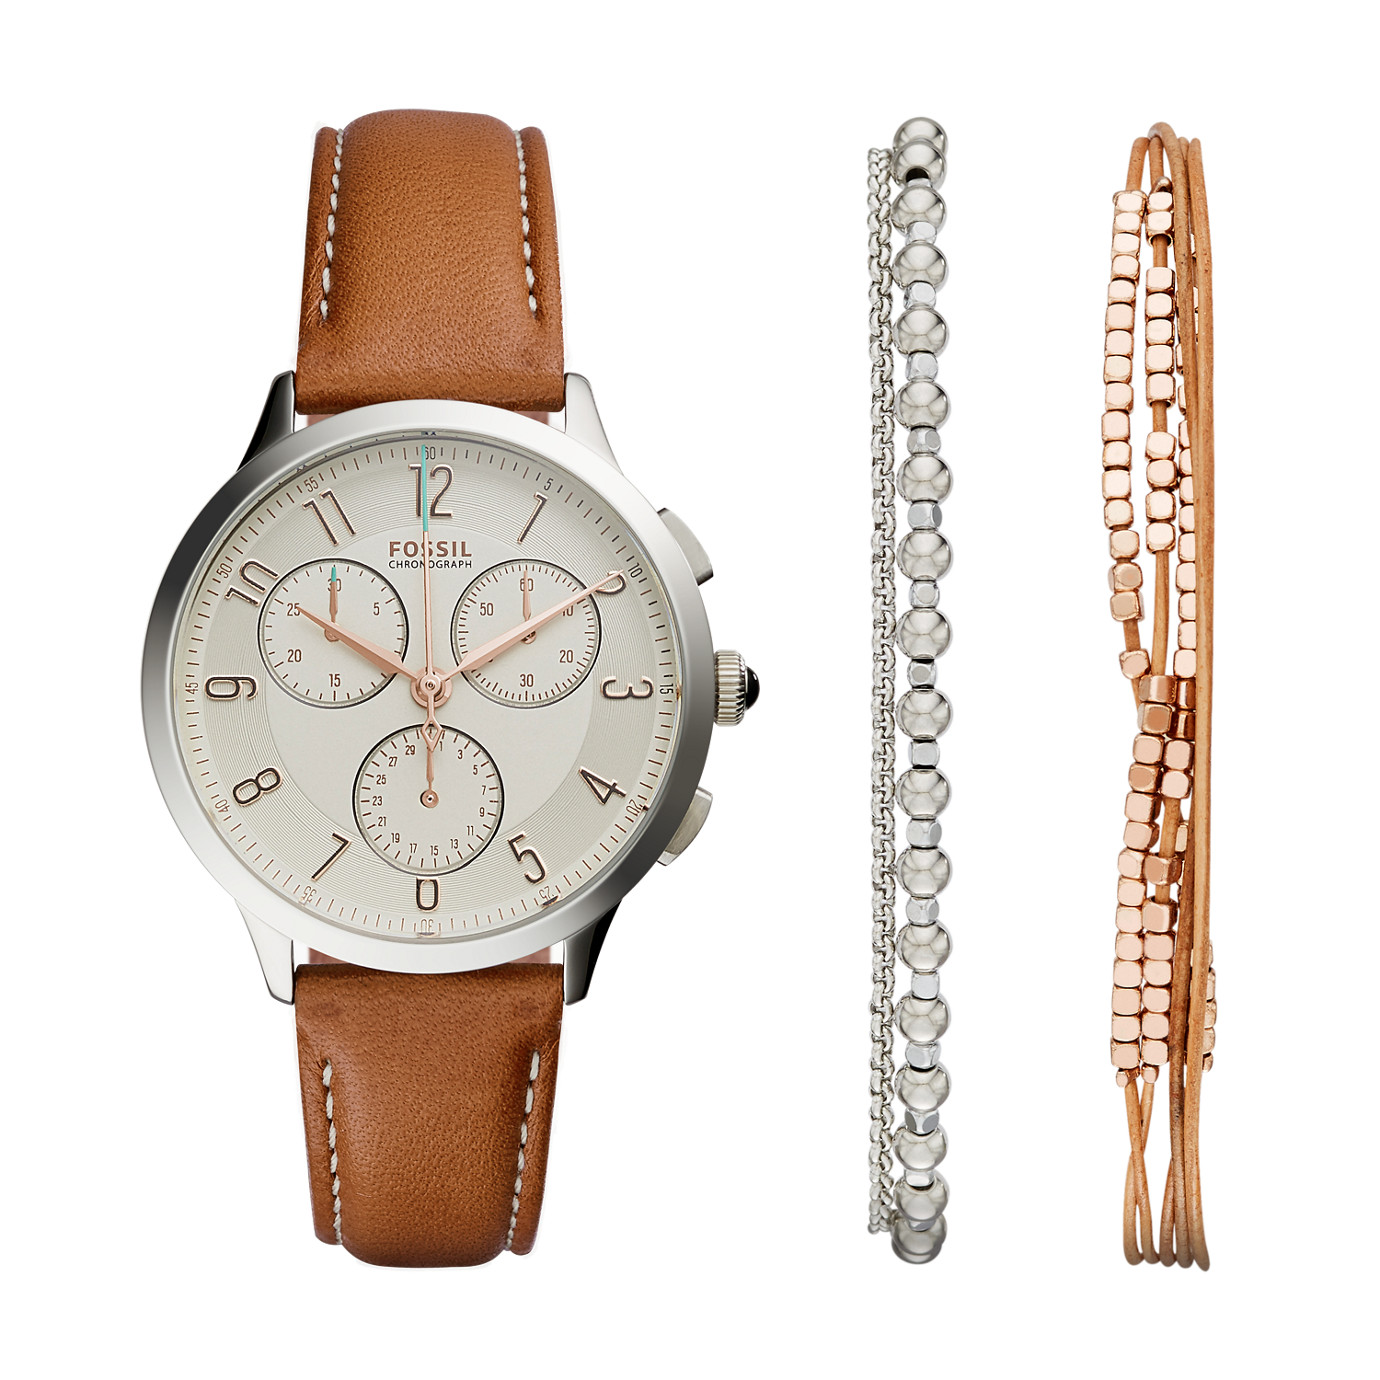 LIGHT BROWN LEATHER WATCH